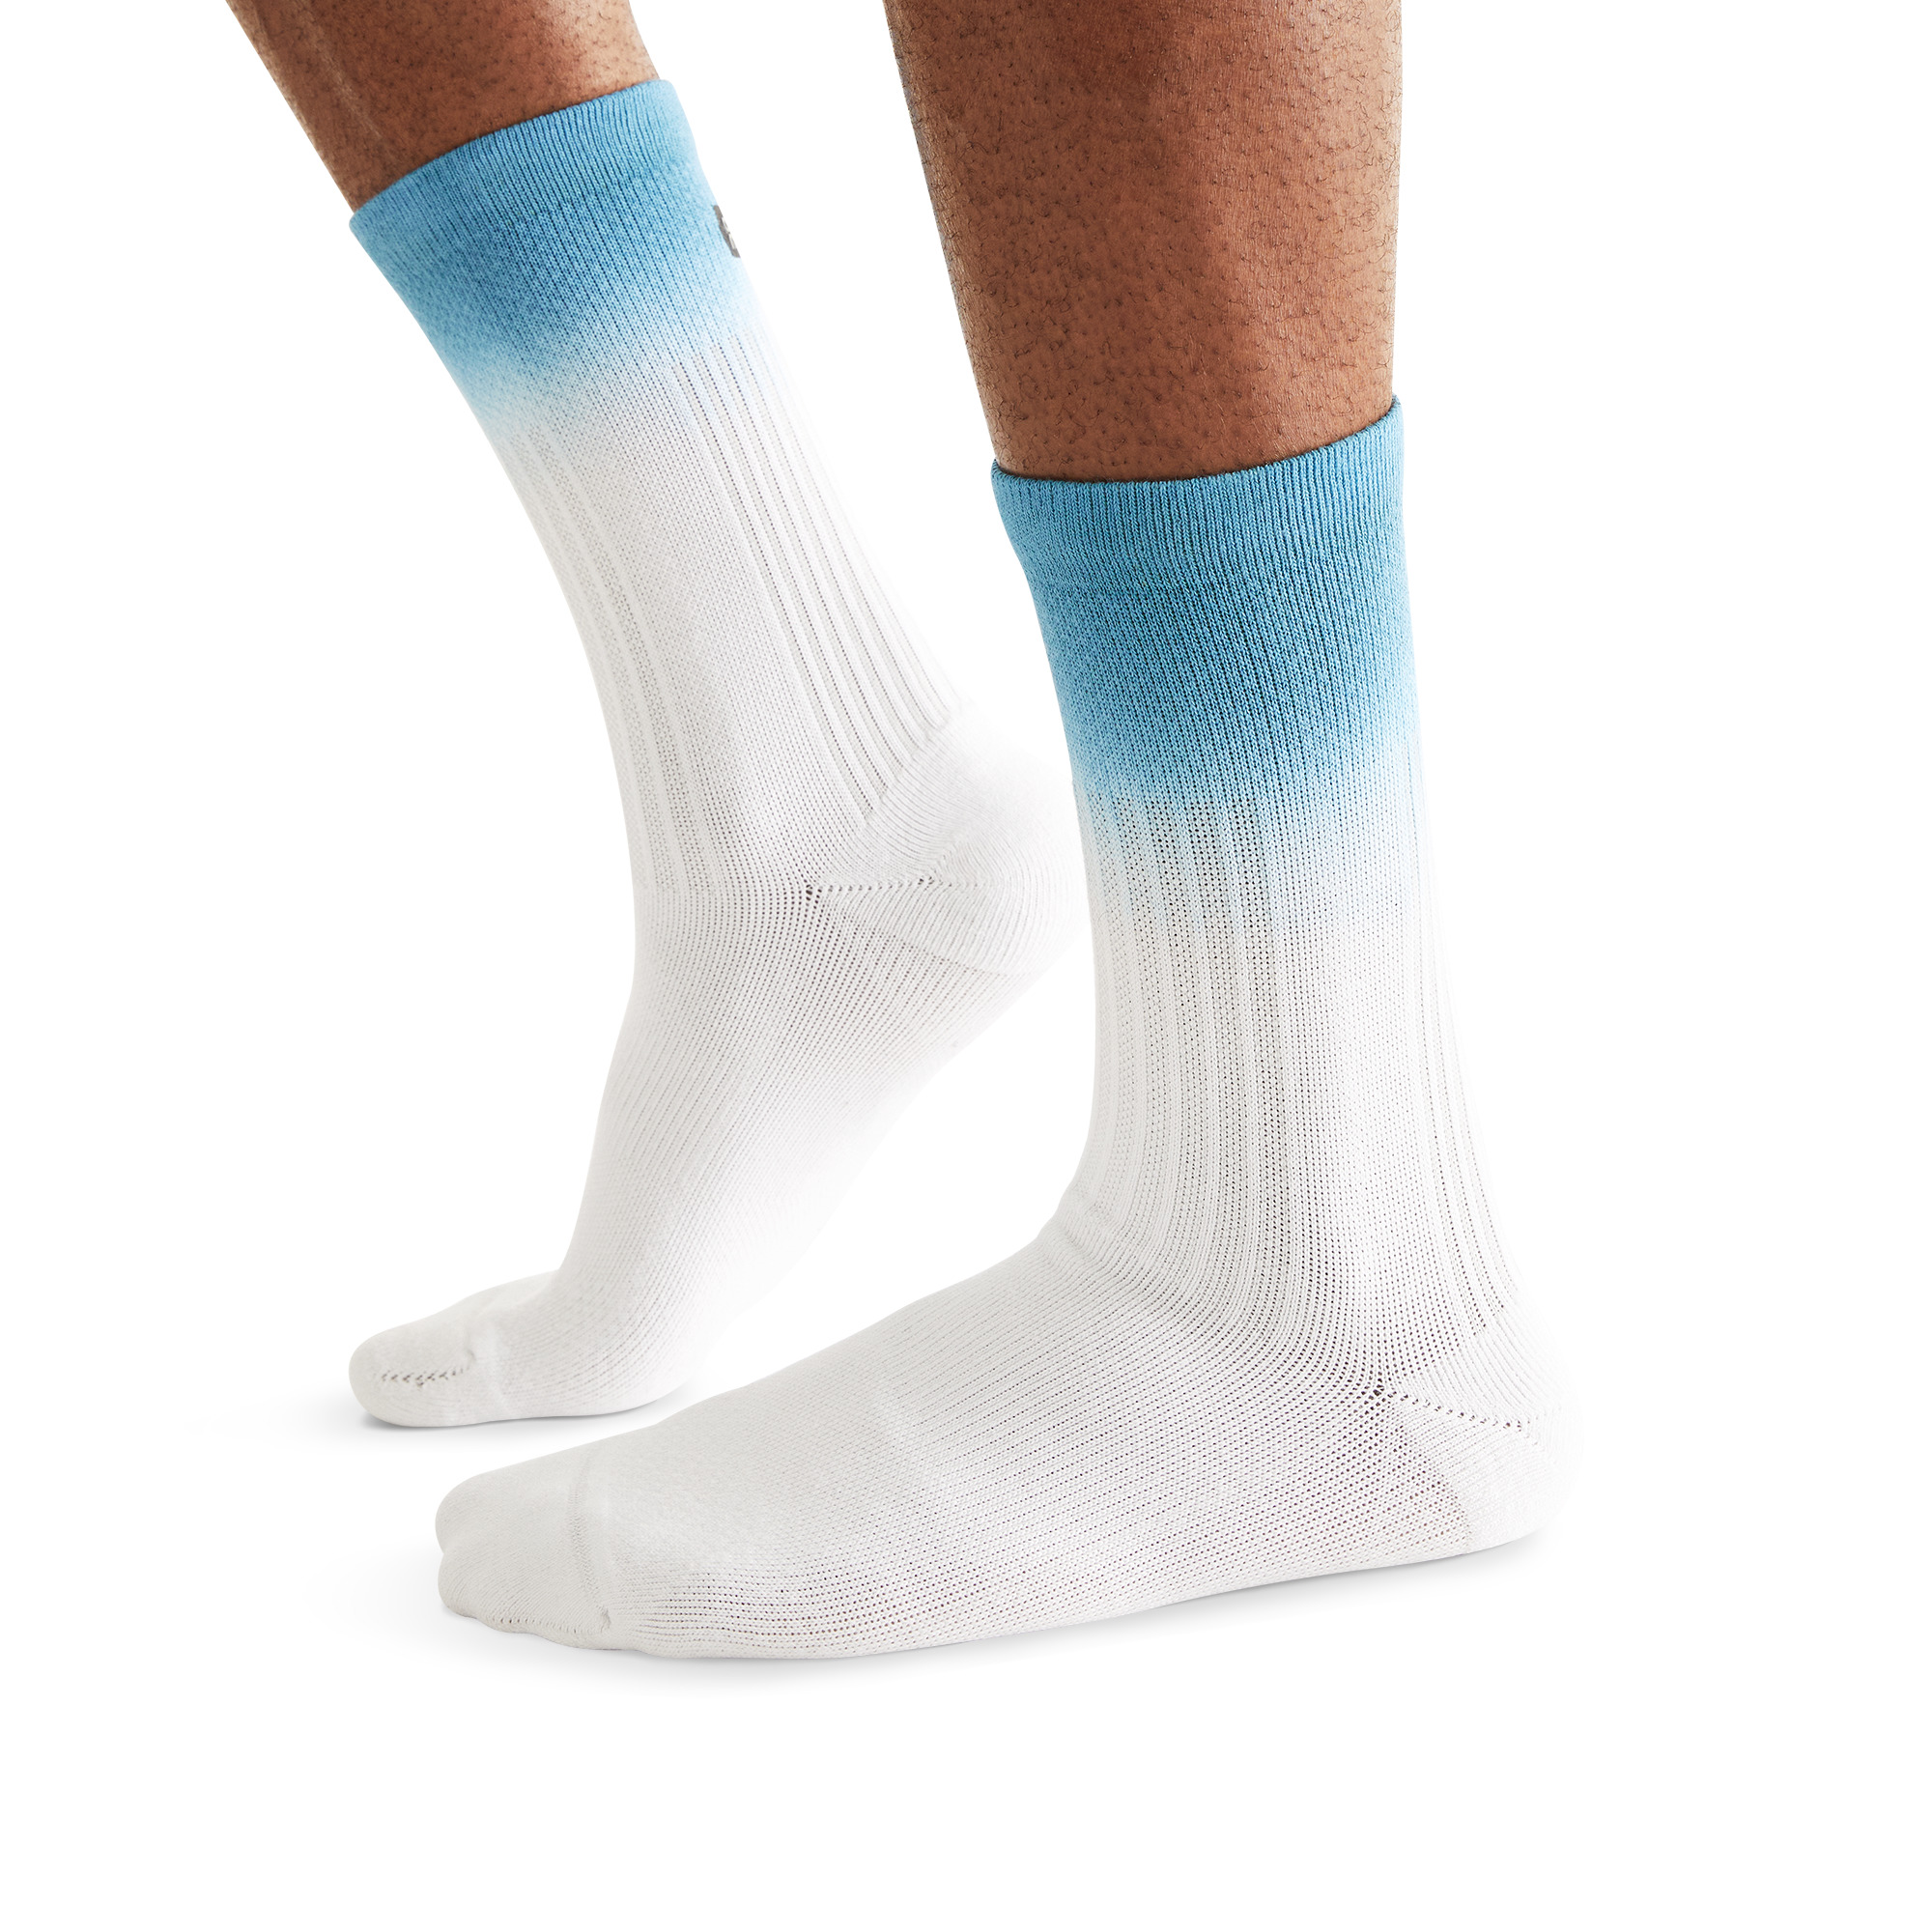 All-Day Sock - 1